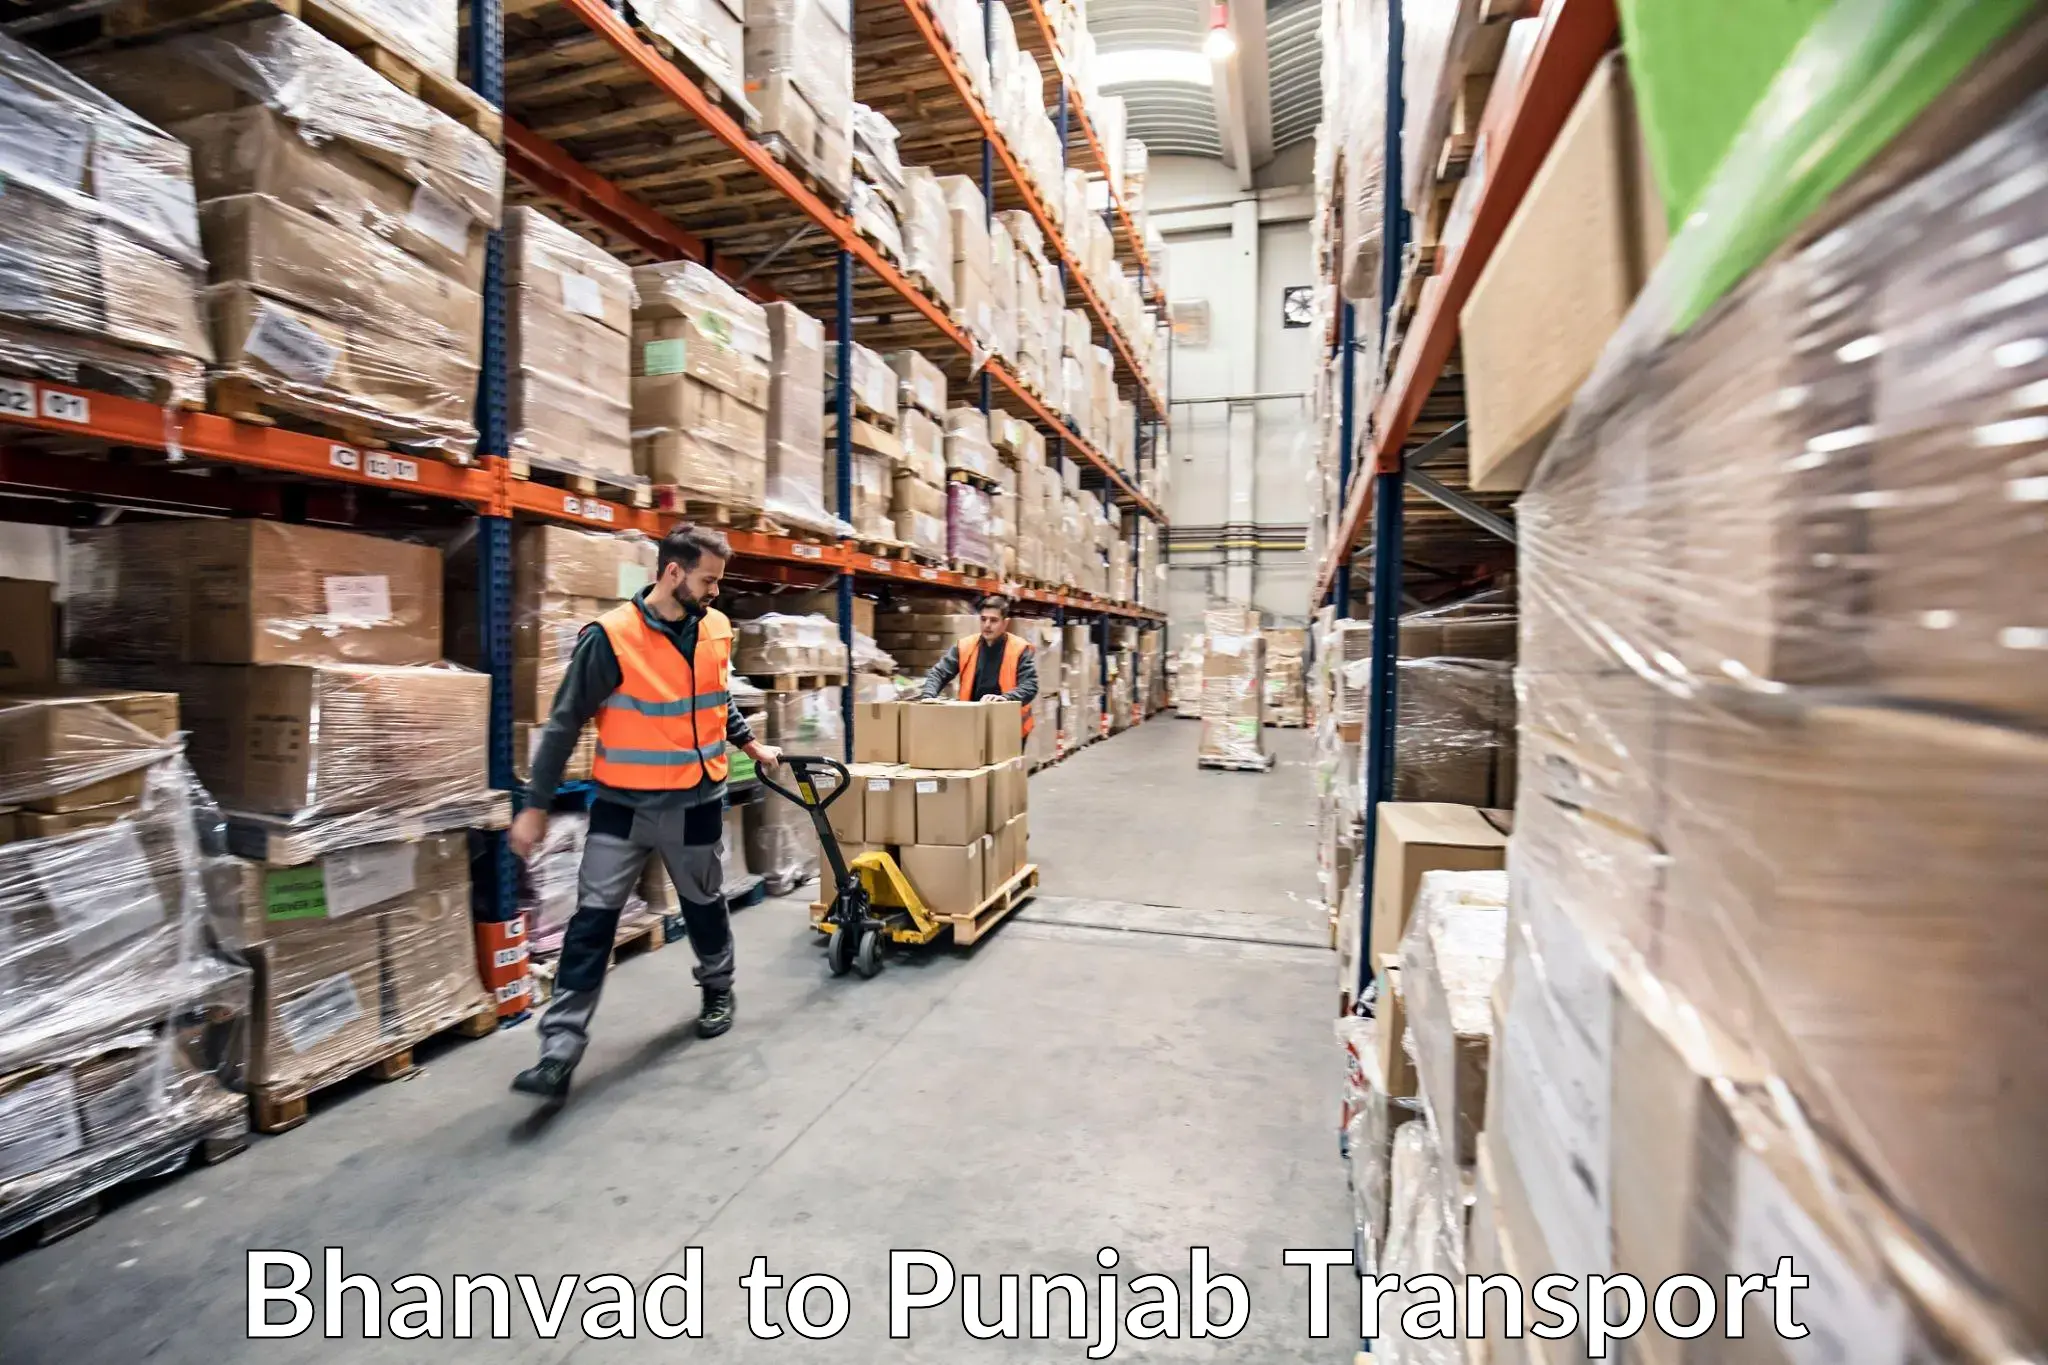 Truck transport companies in India Bhanvad to Bagha Purana